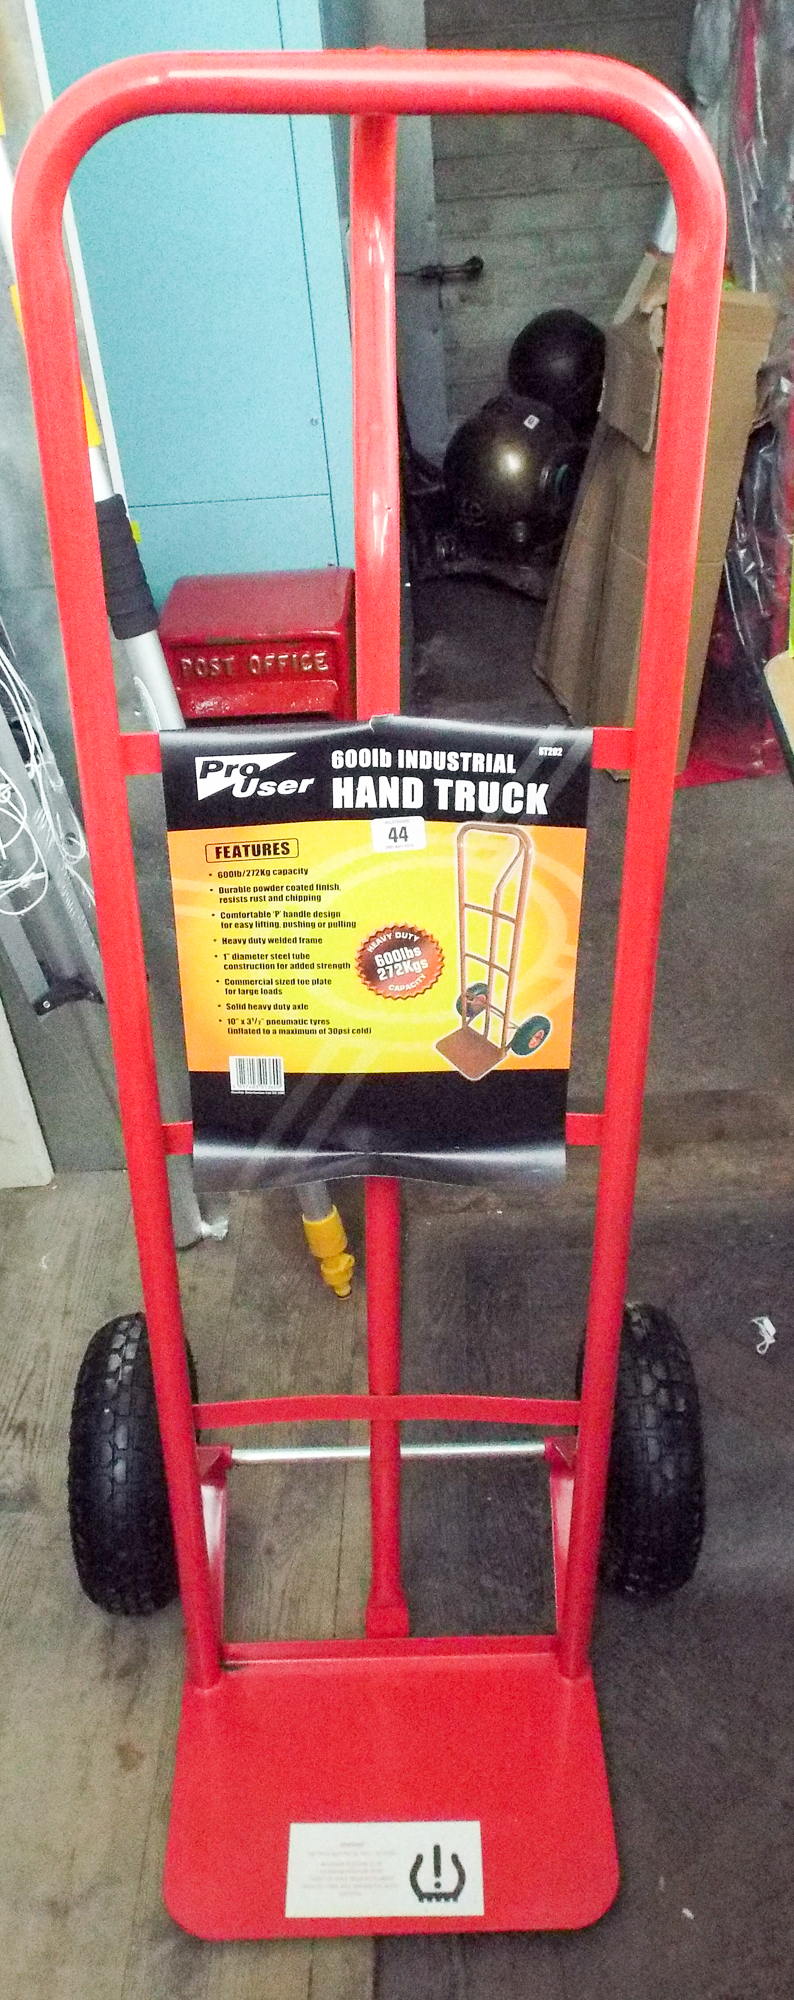 A new 600lb workload industrial sack truck